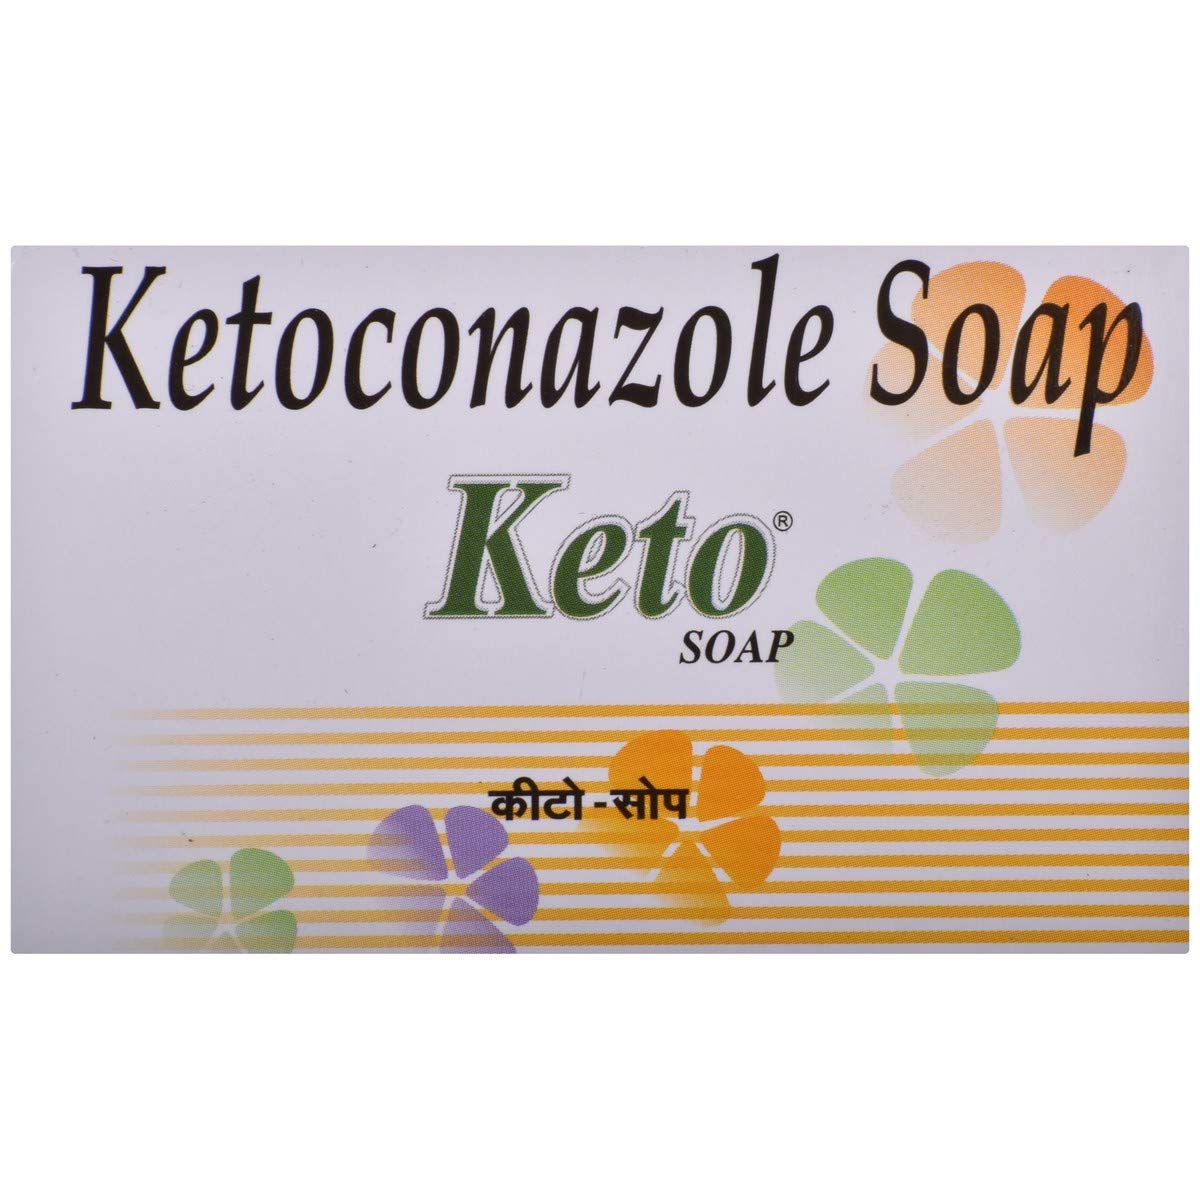 Shop Keto Medicated Soap (Ketoconazole) at price 115.00 from Med Manor Online - Ayush Care